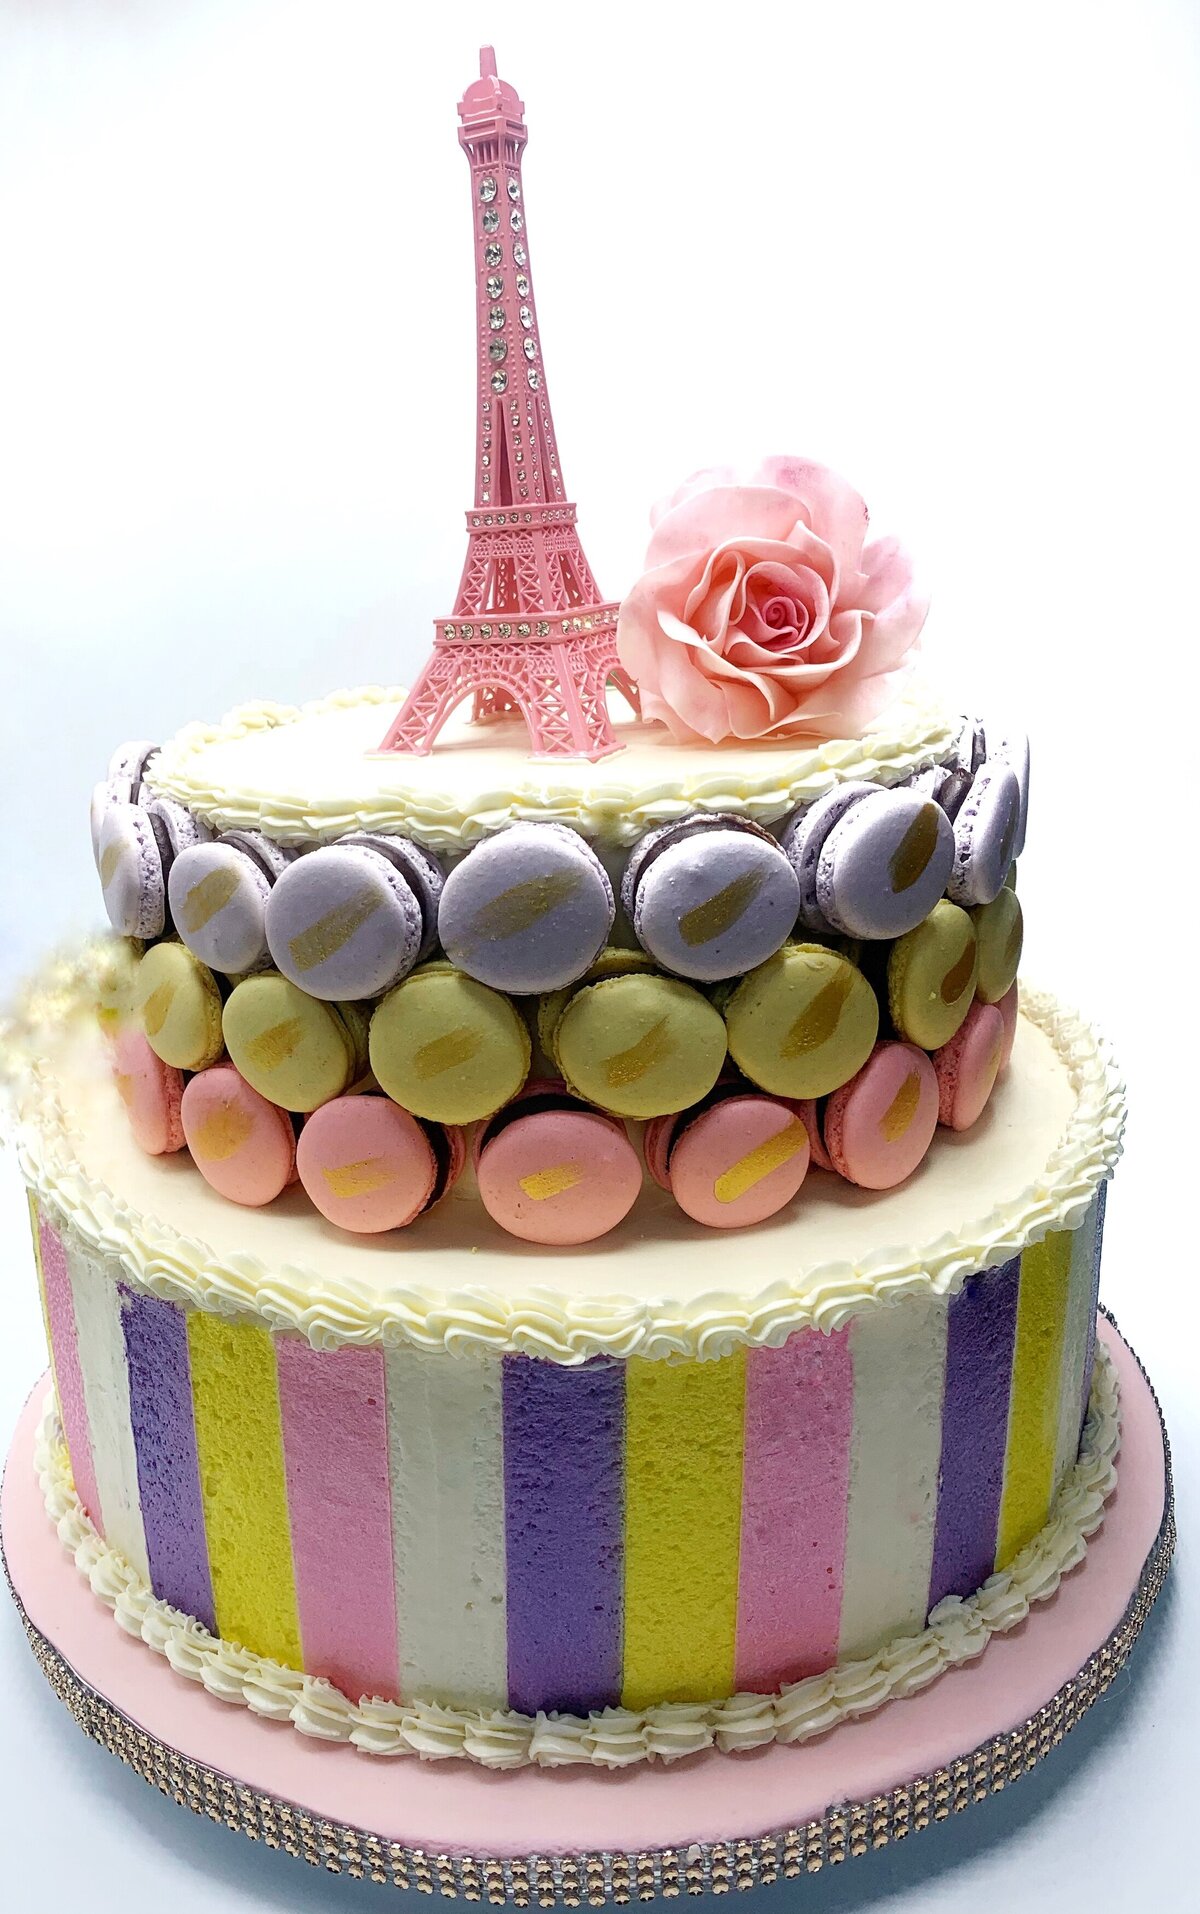 Paris inspired 2 tier buttercream cake  decorated with pink, purple, yellow stripes , colored macarons. Eiffel tower and handcrafted sugar flower rose on top